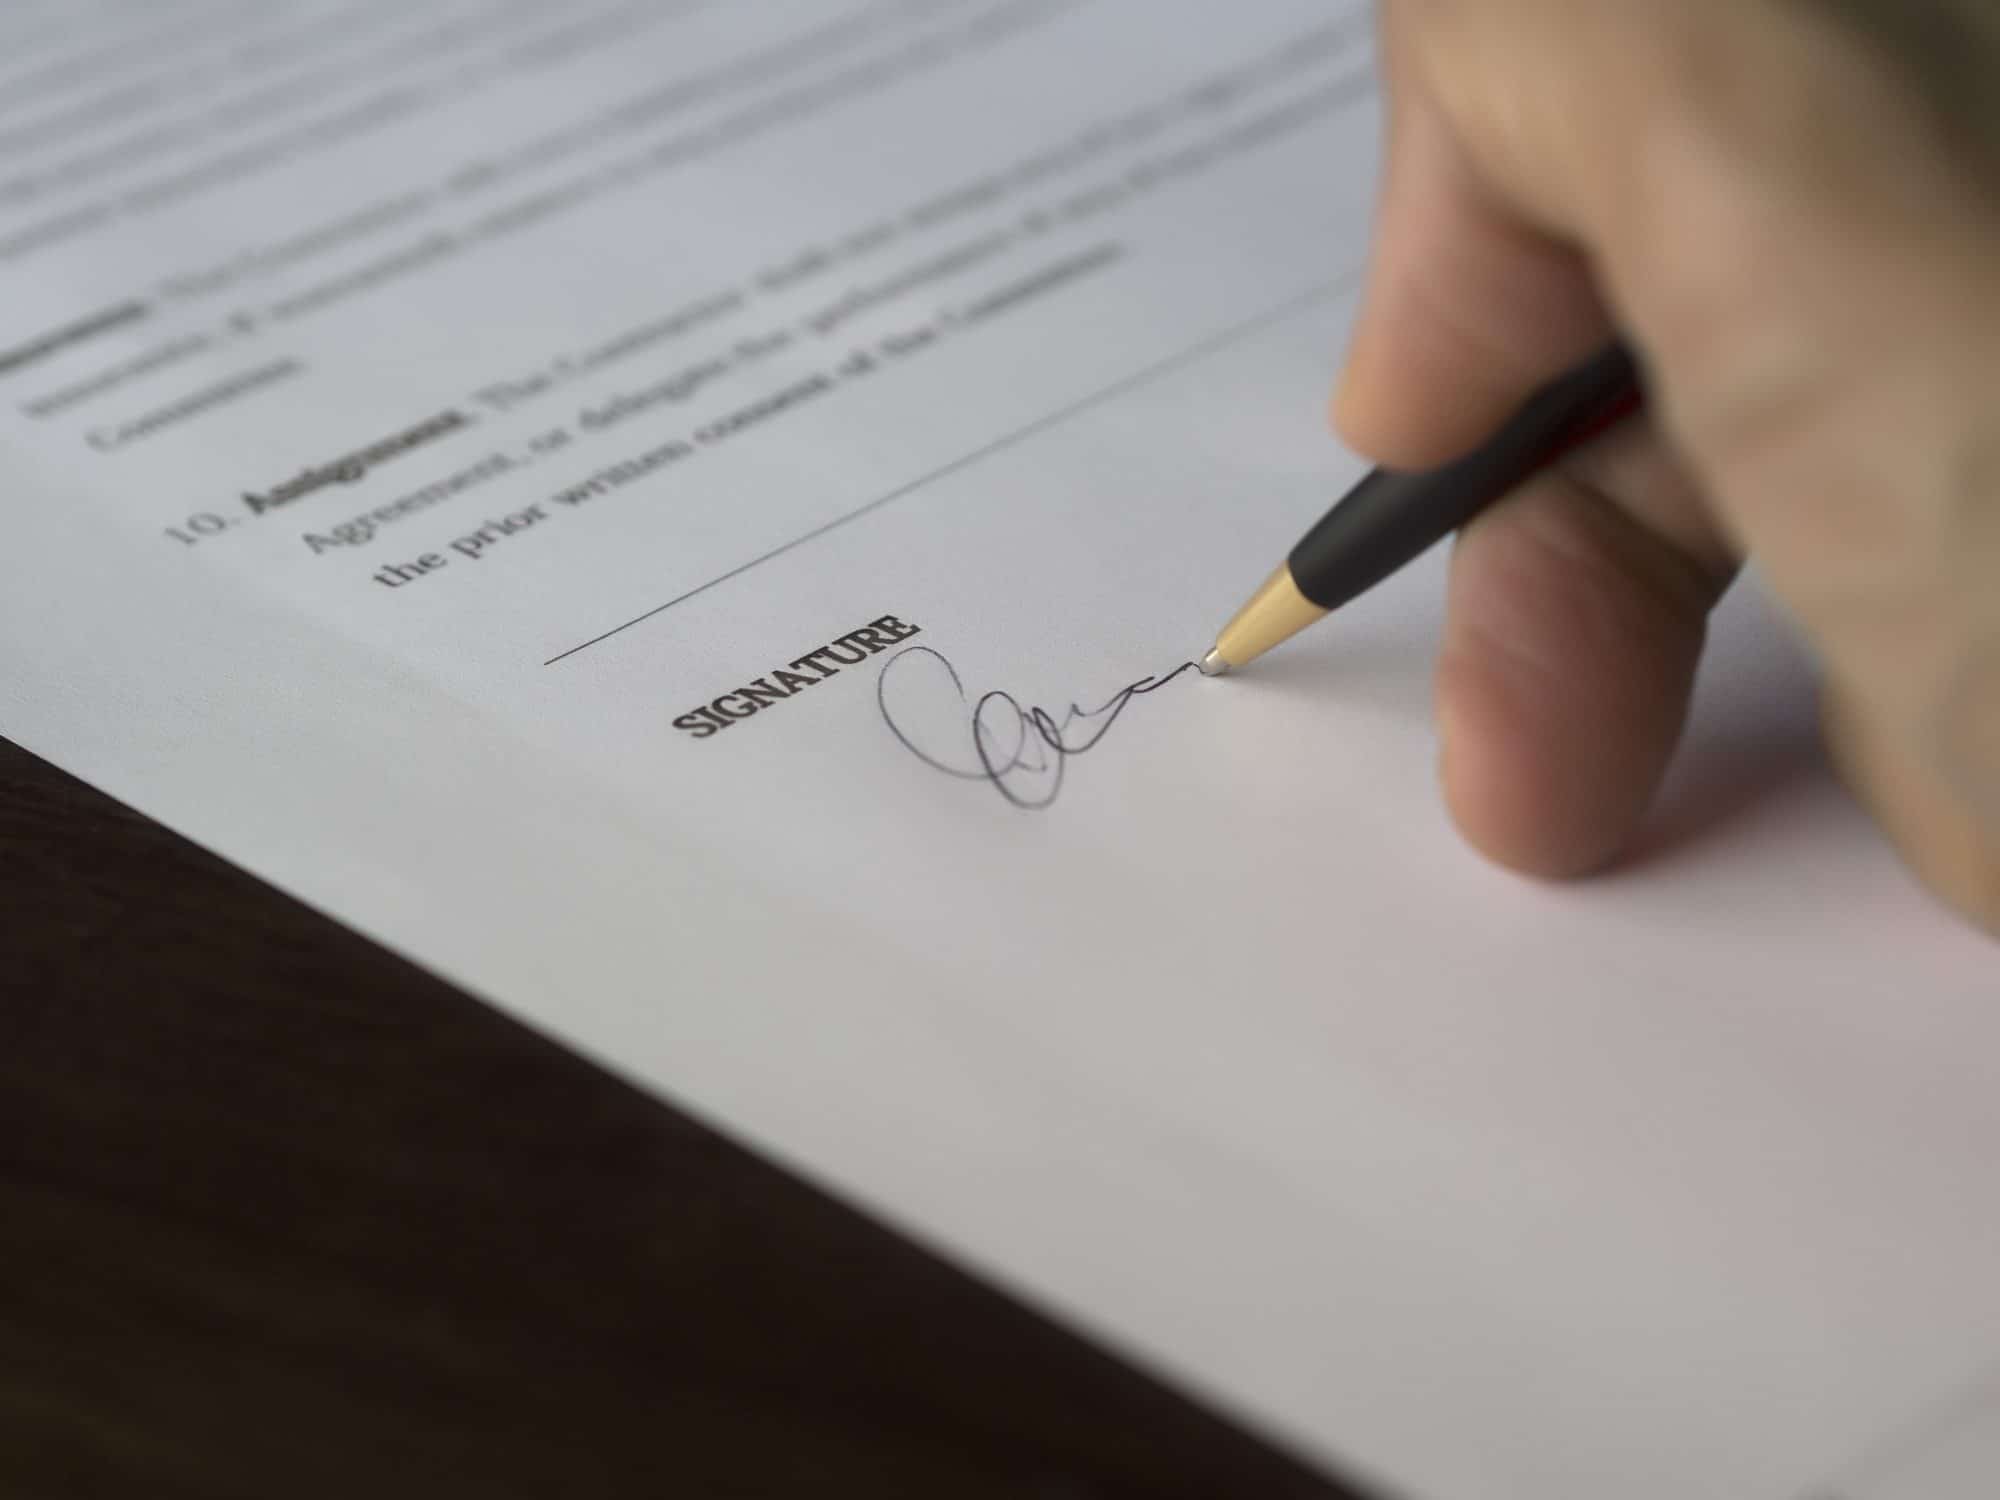 person signing document with pen